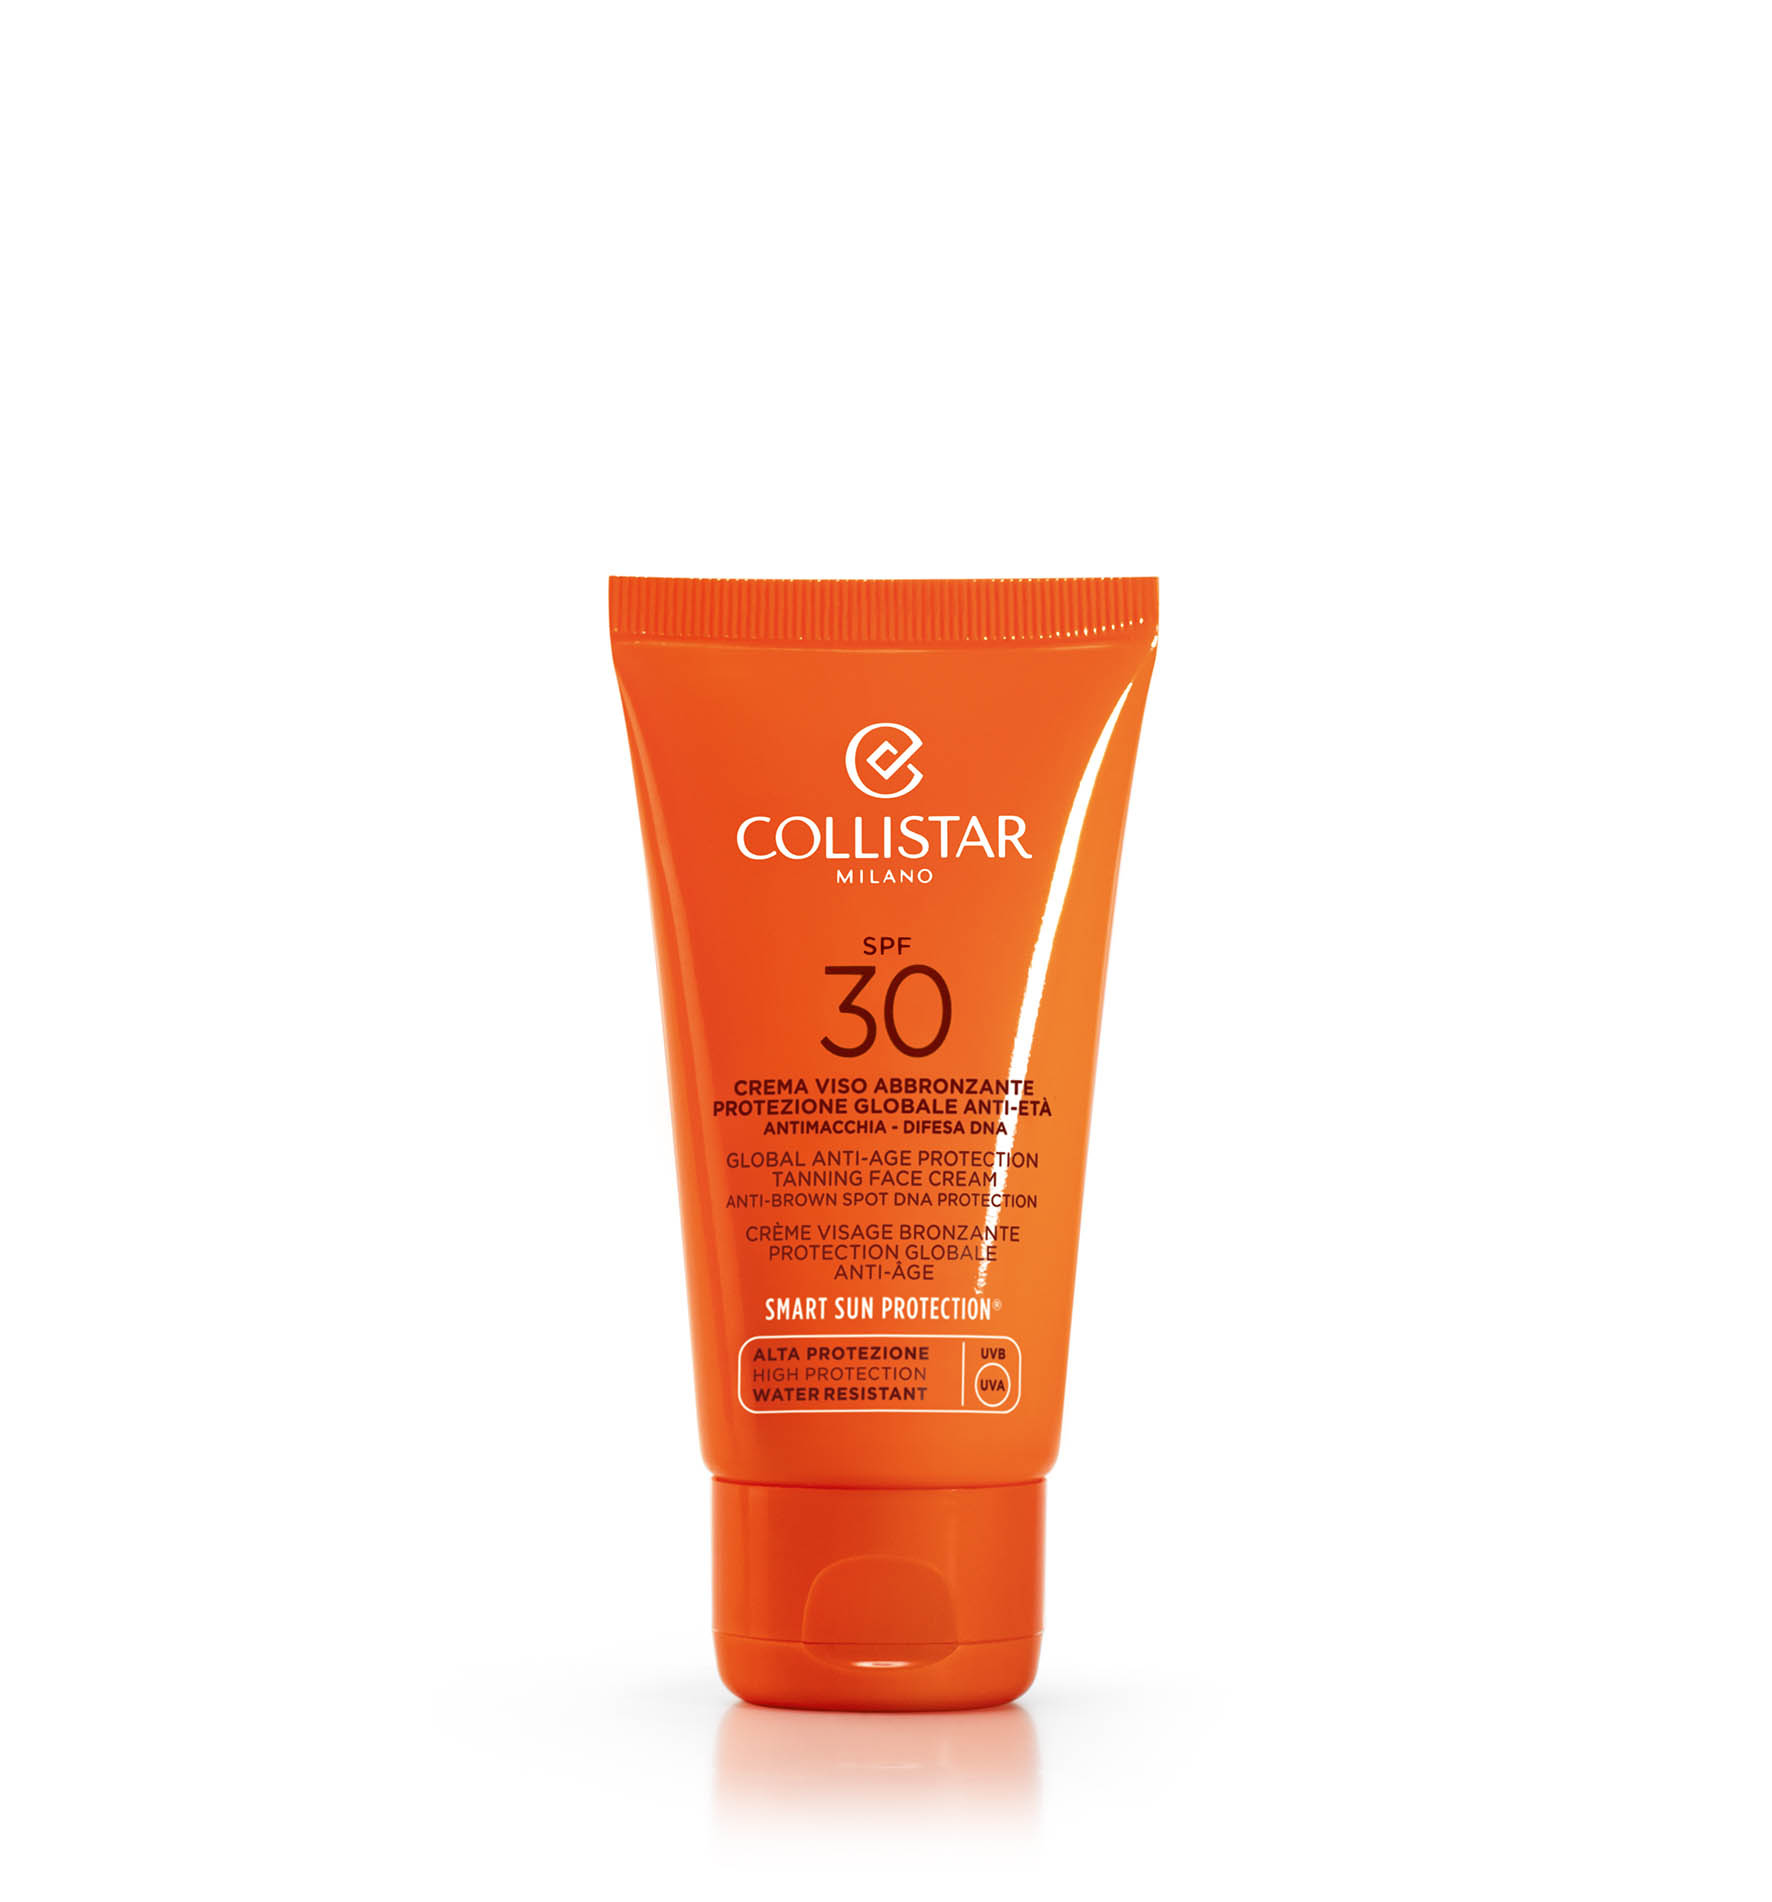 GLOBAL ANTI-AGE PROTECTION TANNING FACE CREAM SPF30 - Face | Collistar - Shop Online Ufficiale